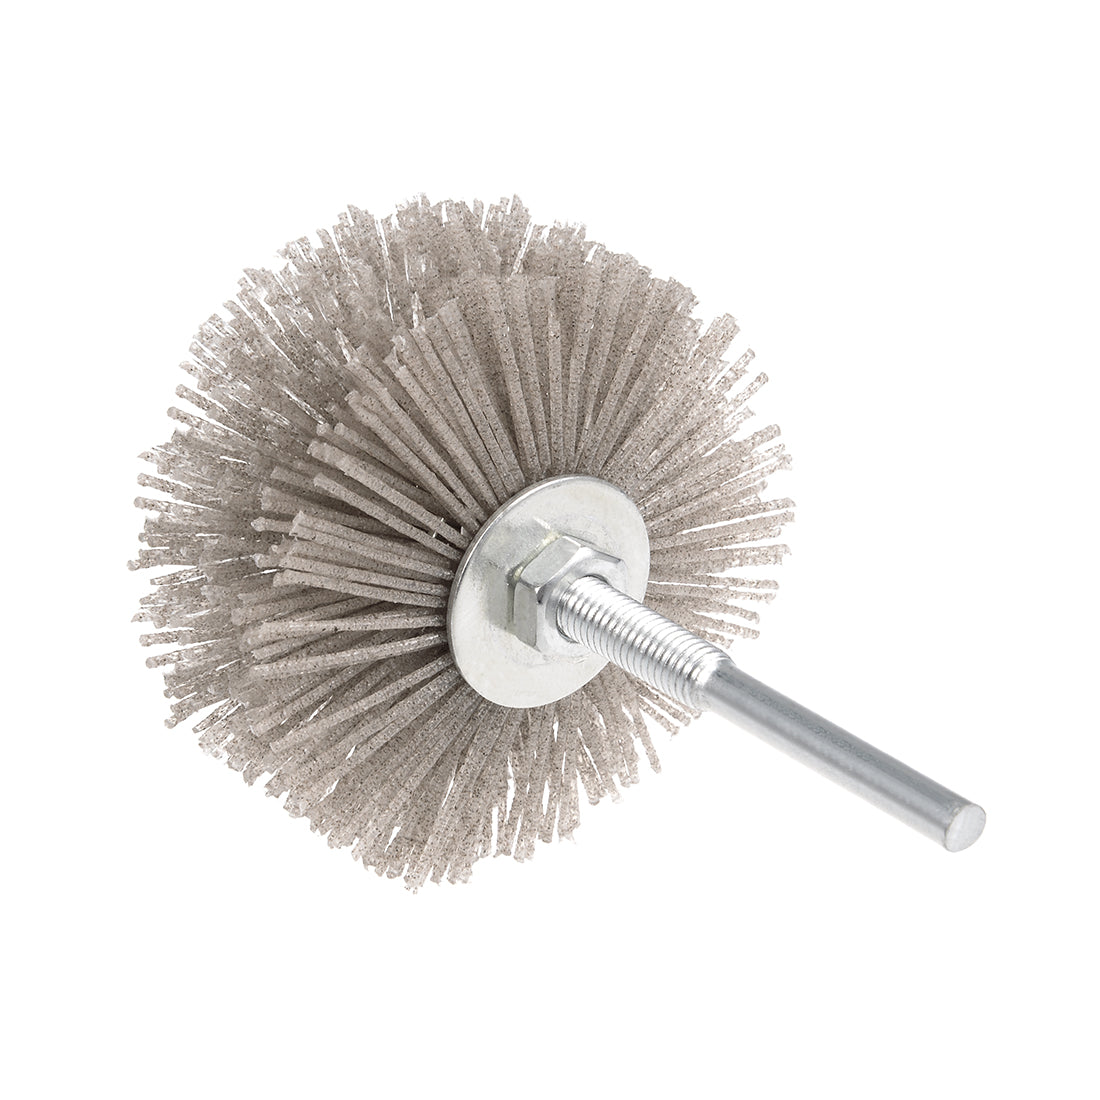 Uxcell Uxcell Nylon Wheel Brush 80 Grits Abrasive Grinding Head with 6mm Threaded Shank